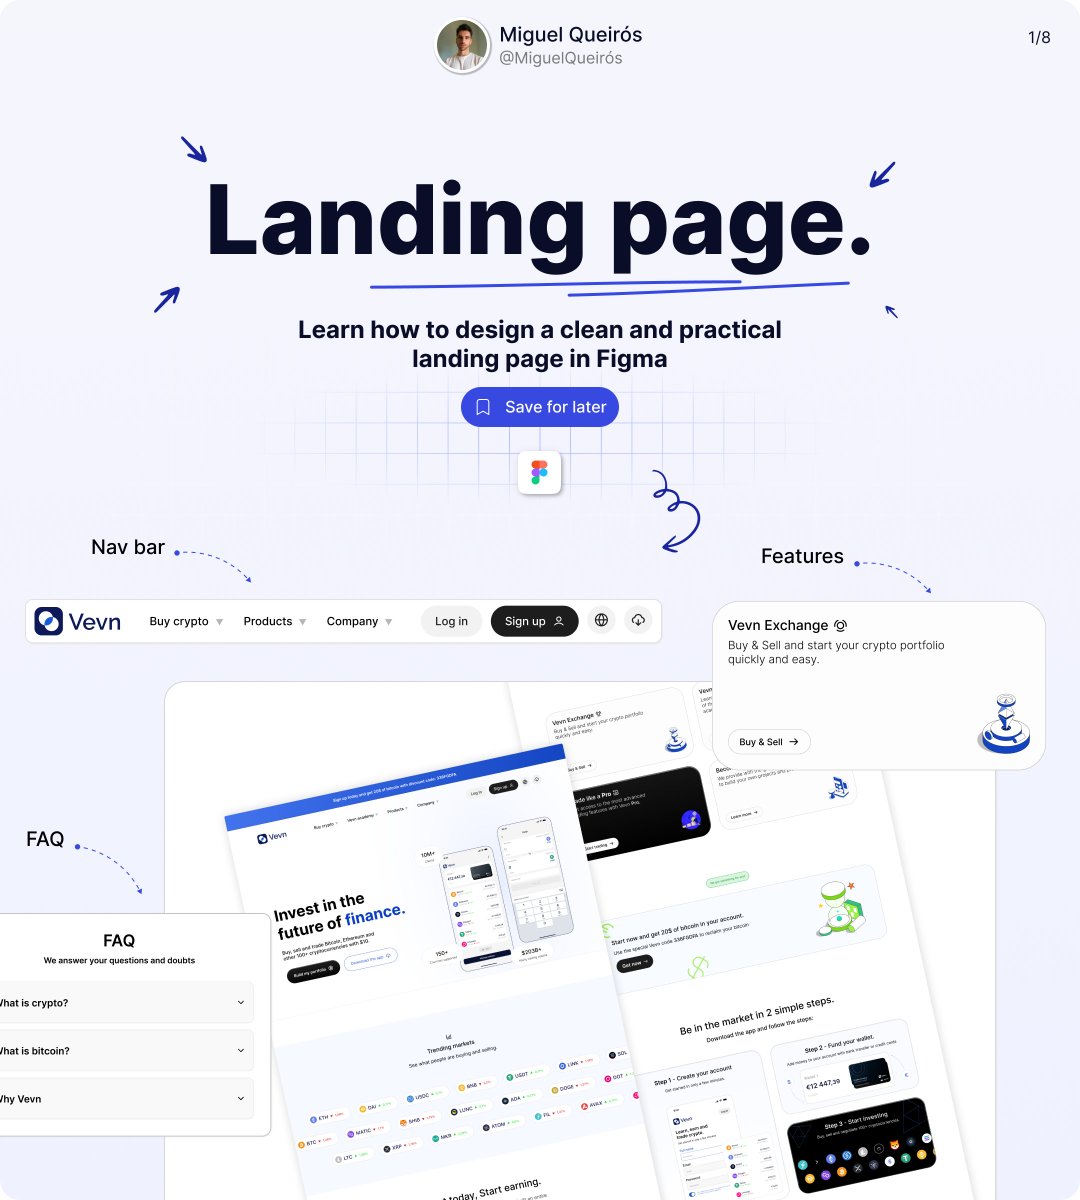 Design your first landing page.

( A thread 🧵)

Retweet and save for later 😉